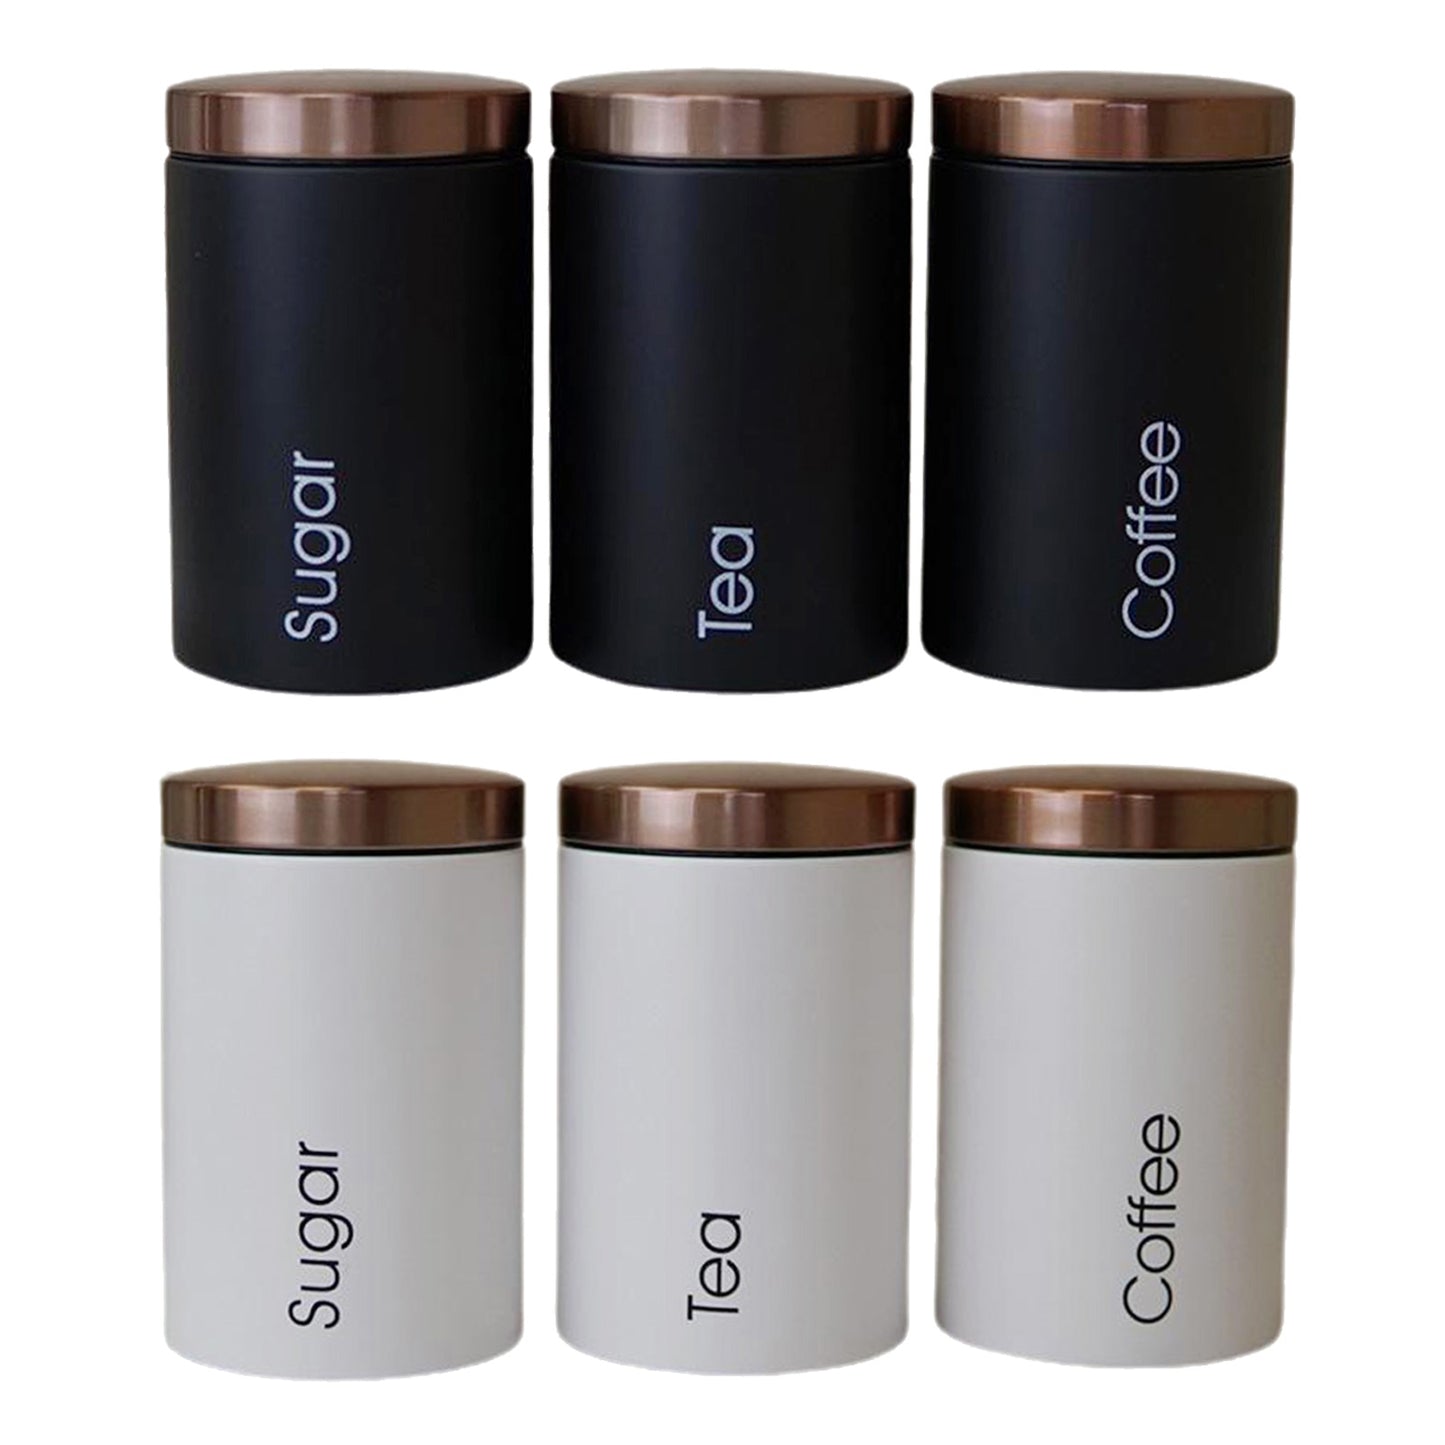 Canister Set for Tea Coffee Sugar